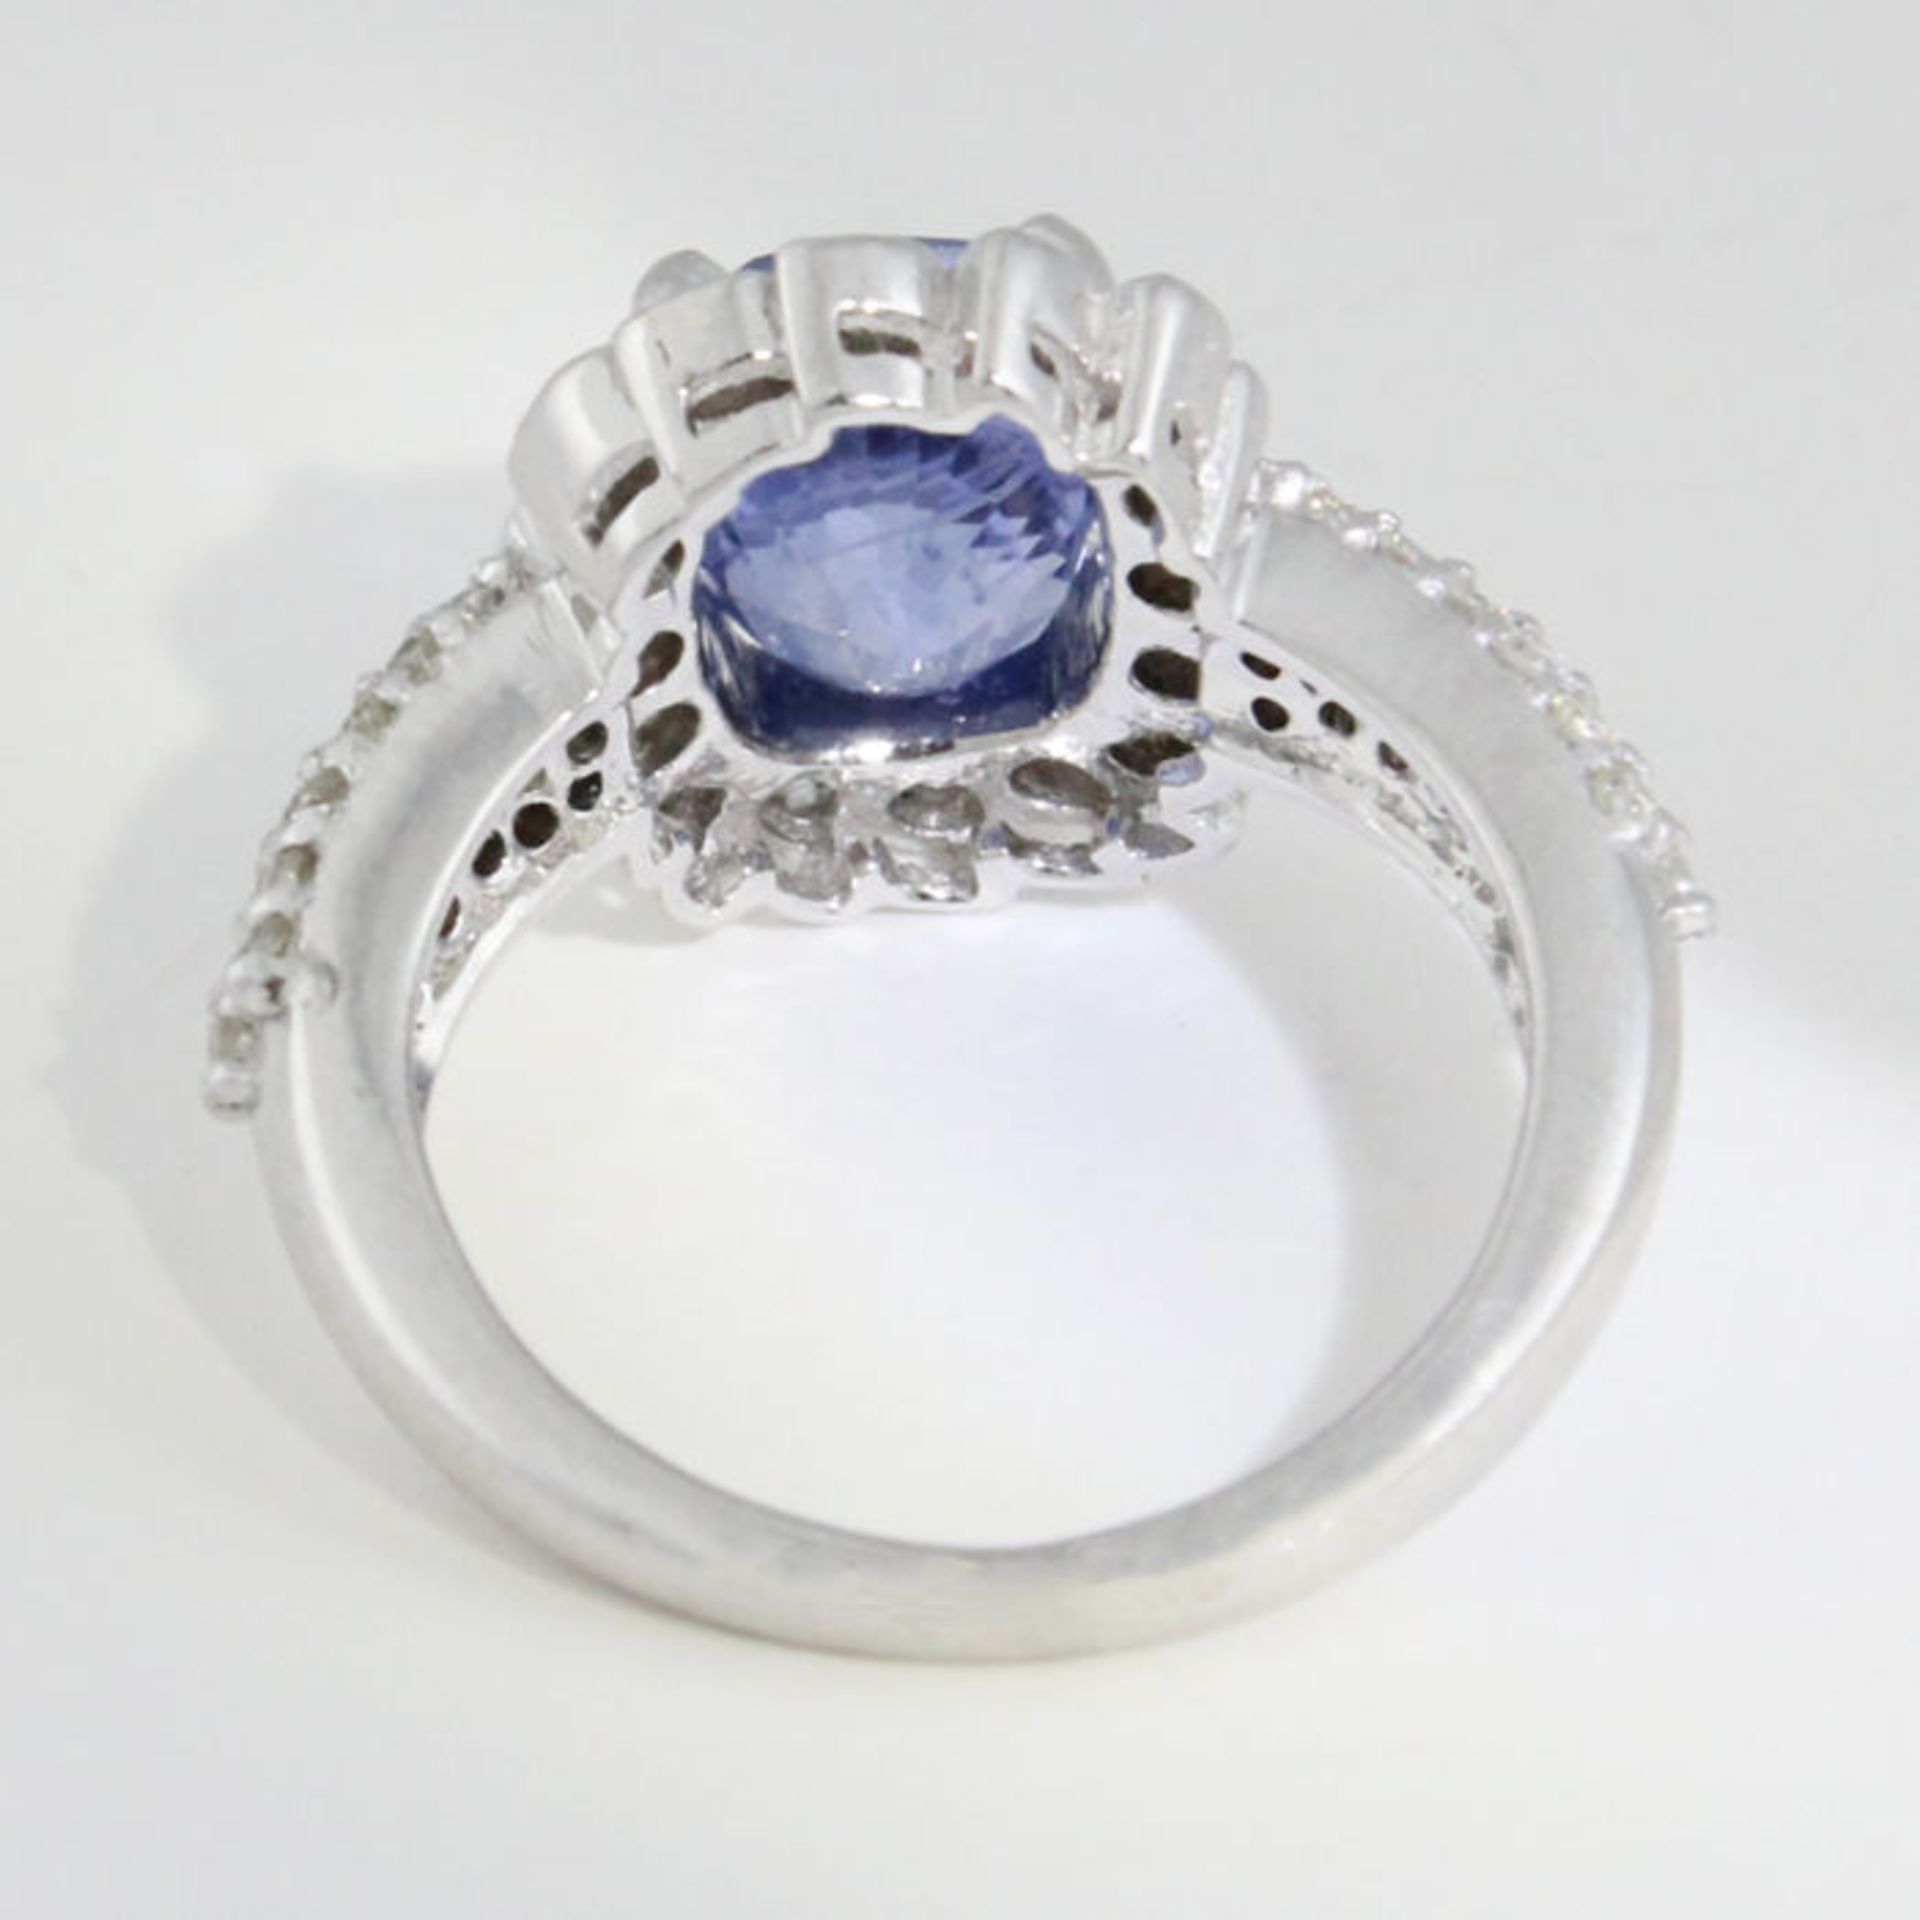 IGI Certified 14 K Very Exclusive Designer White Gold Blue Sapphire and Diamond Ring - Image 7 of 7